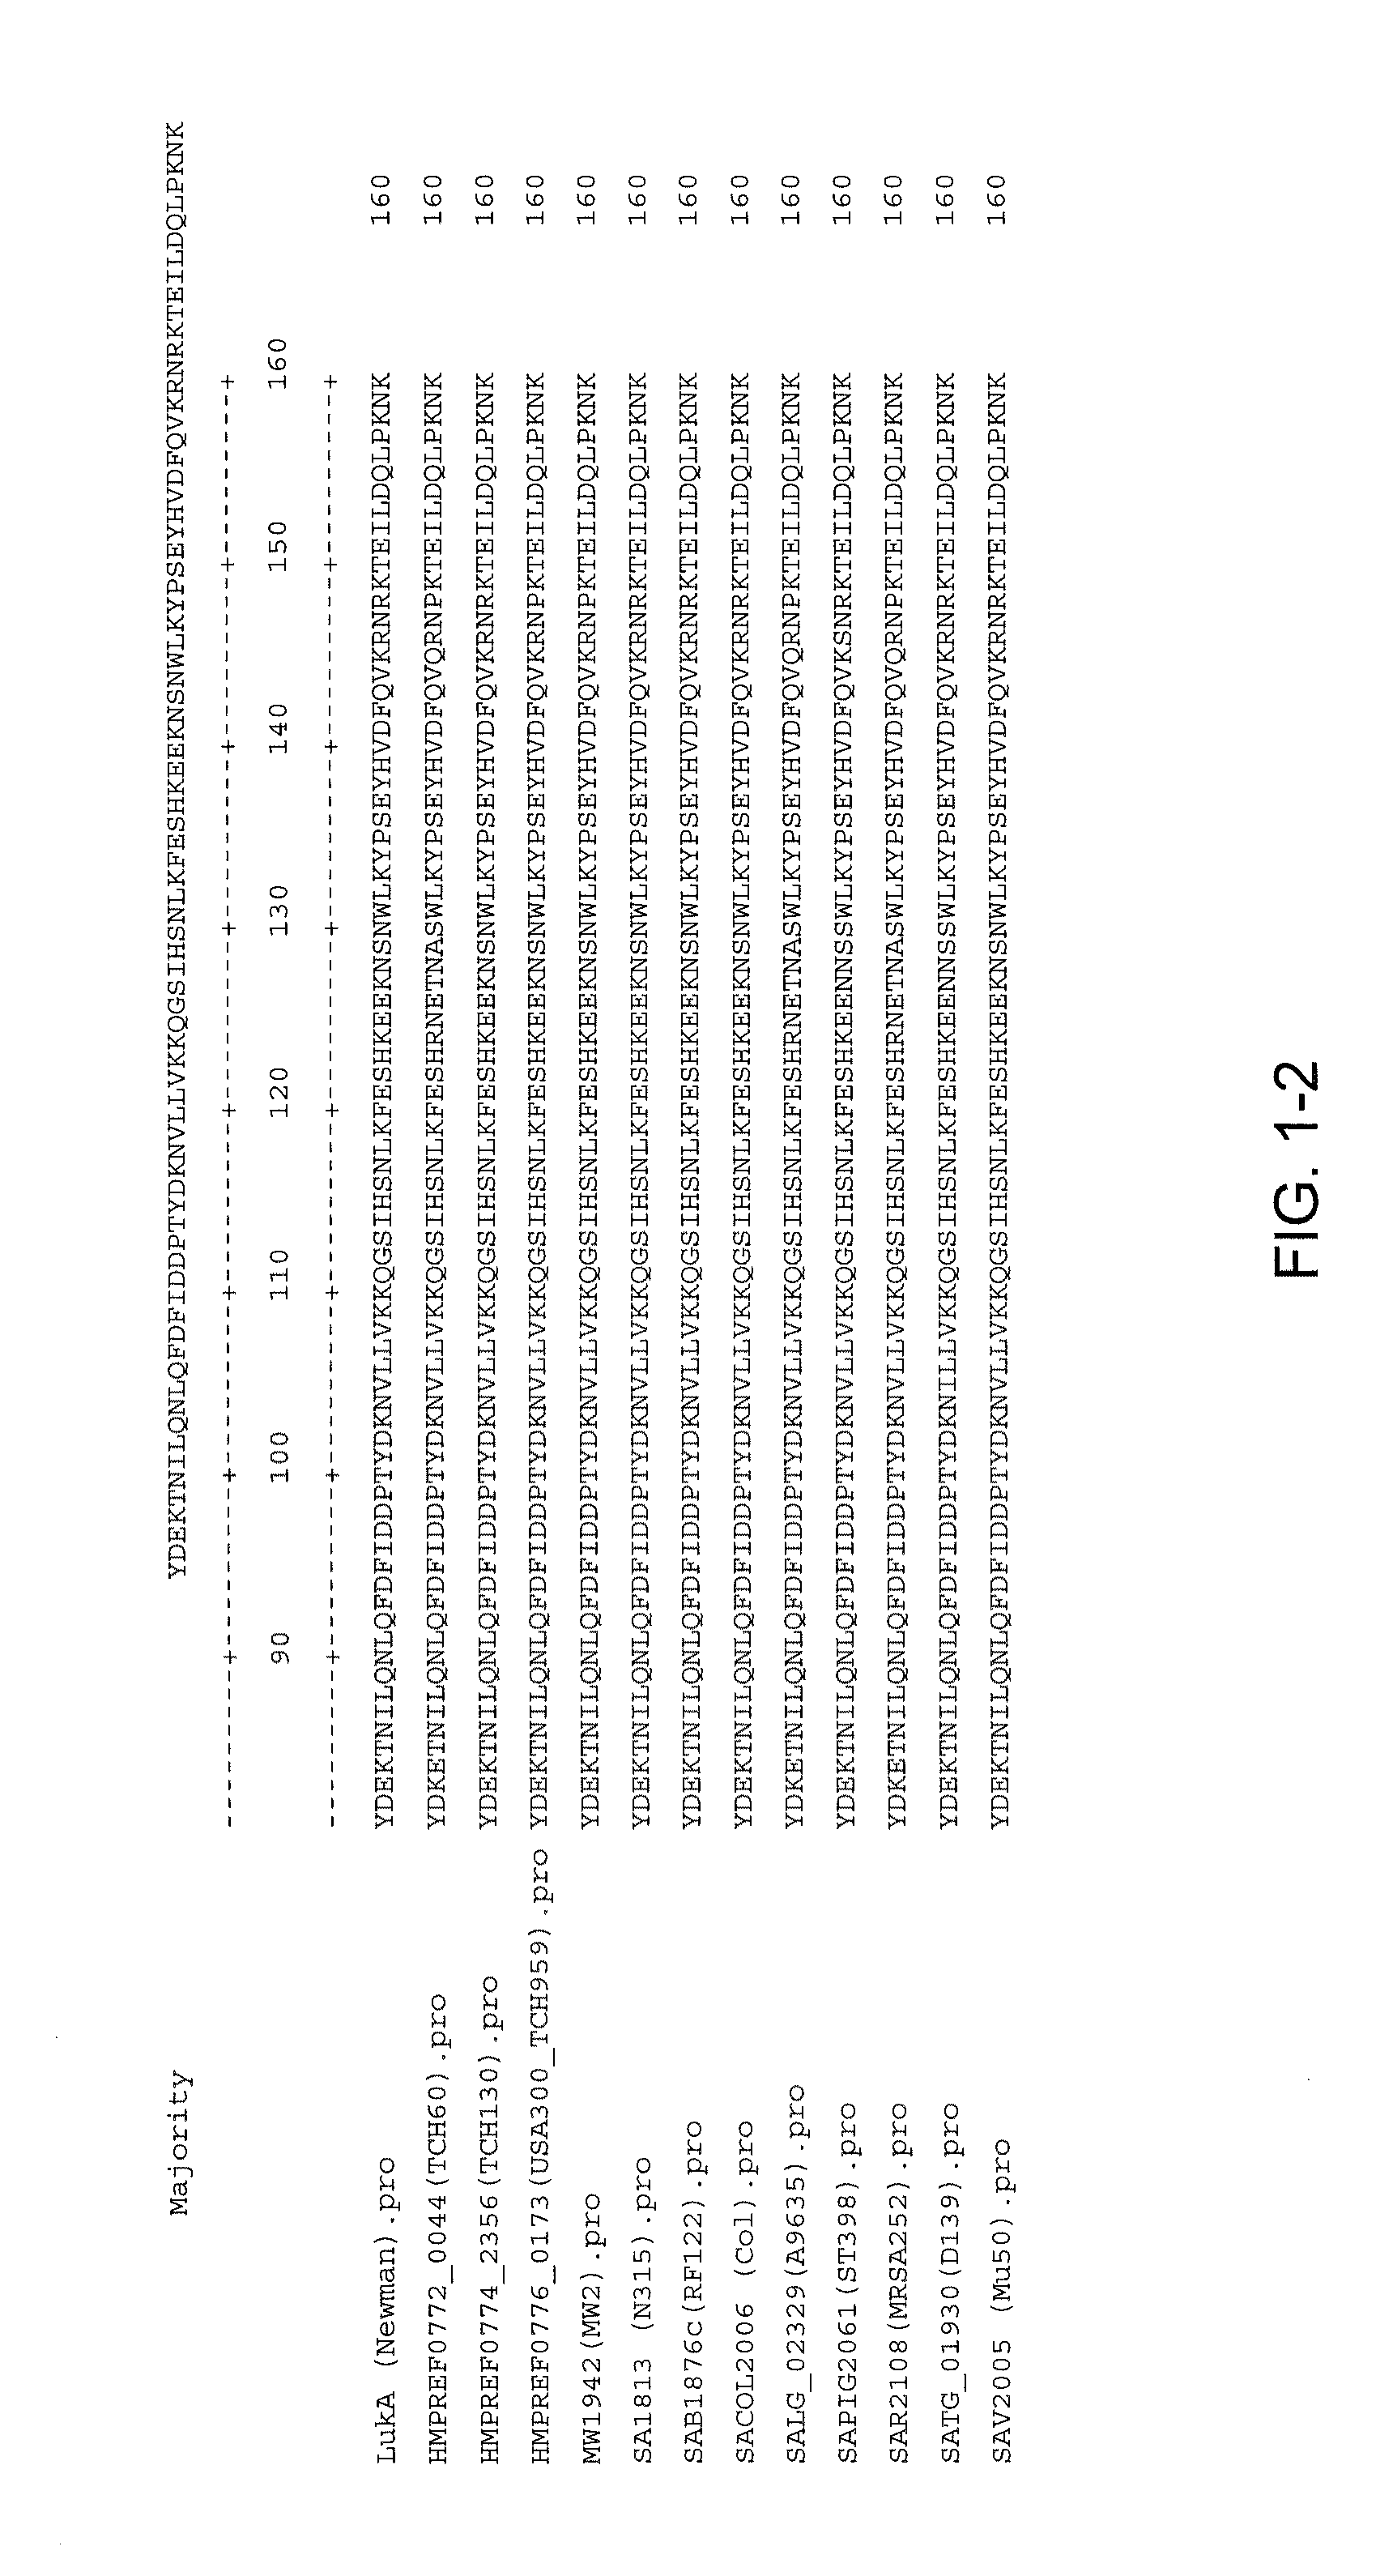 Staphylococcus aureus leukocidins, therapeutic compositions, and uses thereof